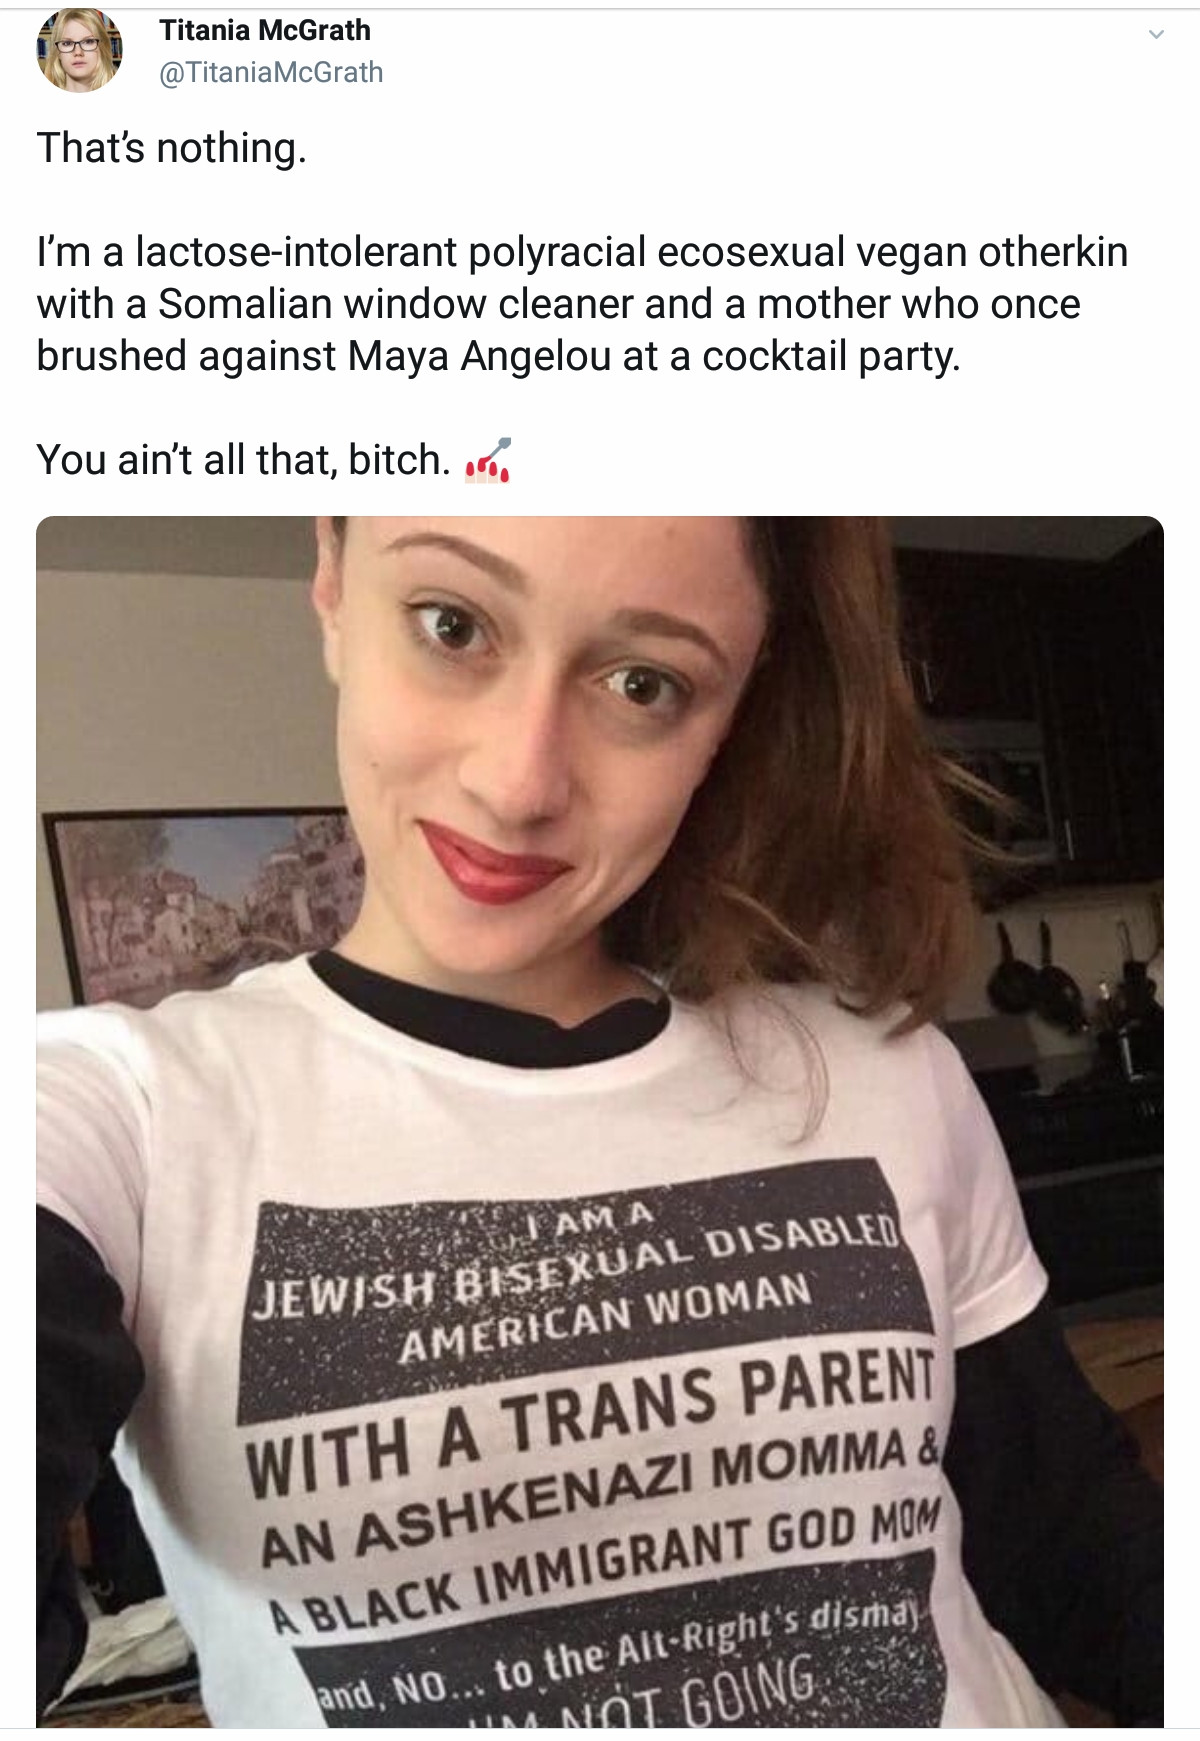 jewish bisexual disabled american woman - Titania McGrath McGrath That's nothing. I'm a lactoseintolerant polyracial ecosexual vegan otherkin with a Somalian window cleaner and a mother who once brushed against Maya Angelou at a cocktail party. You ain't 